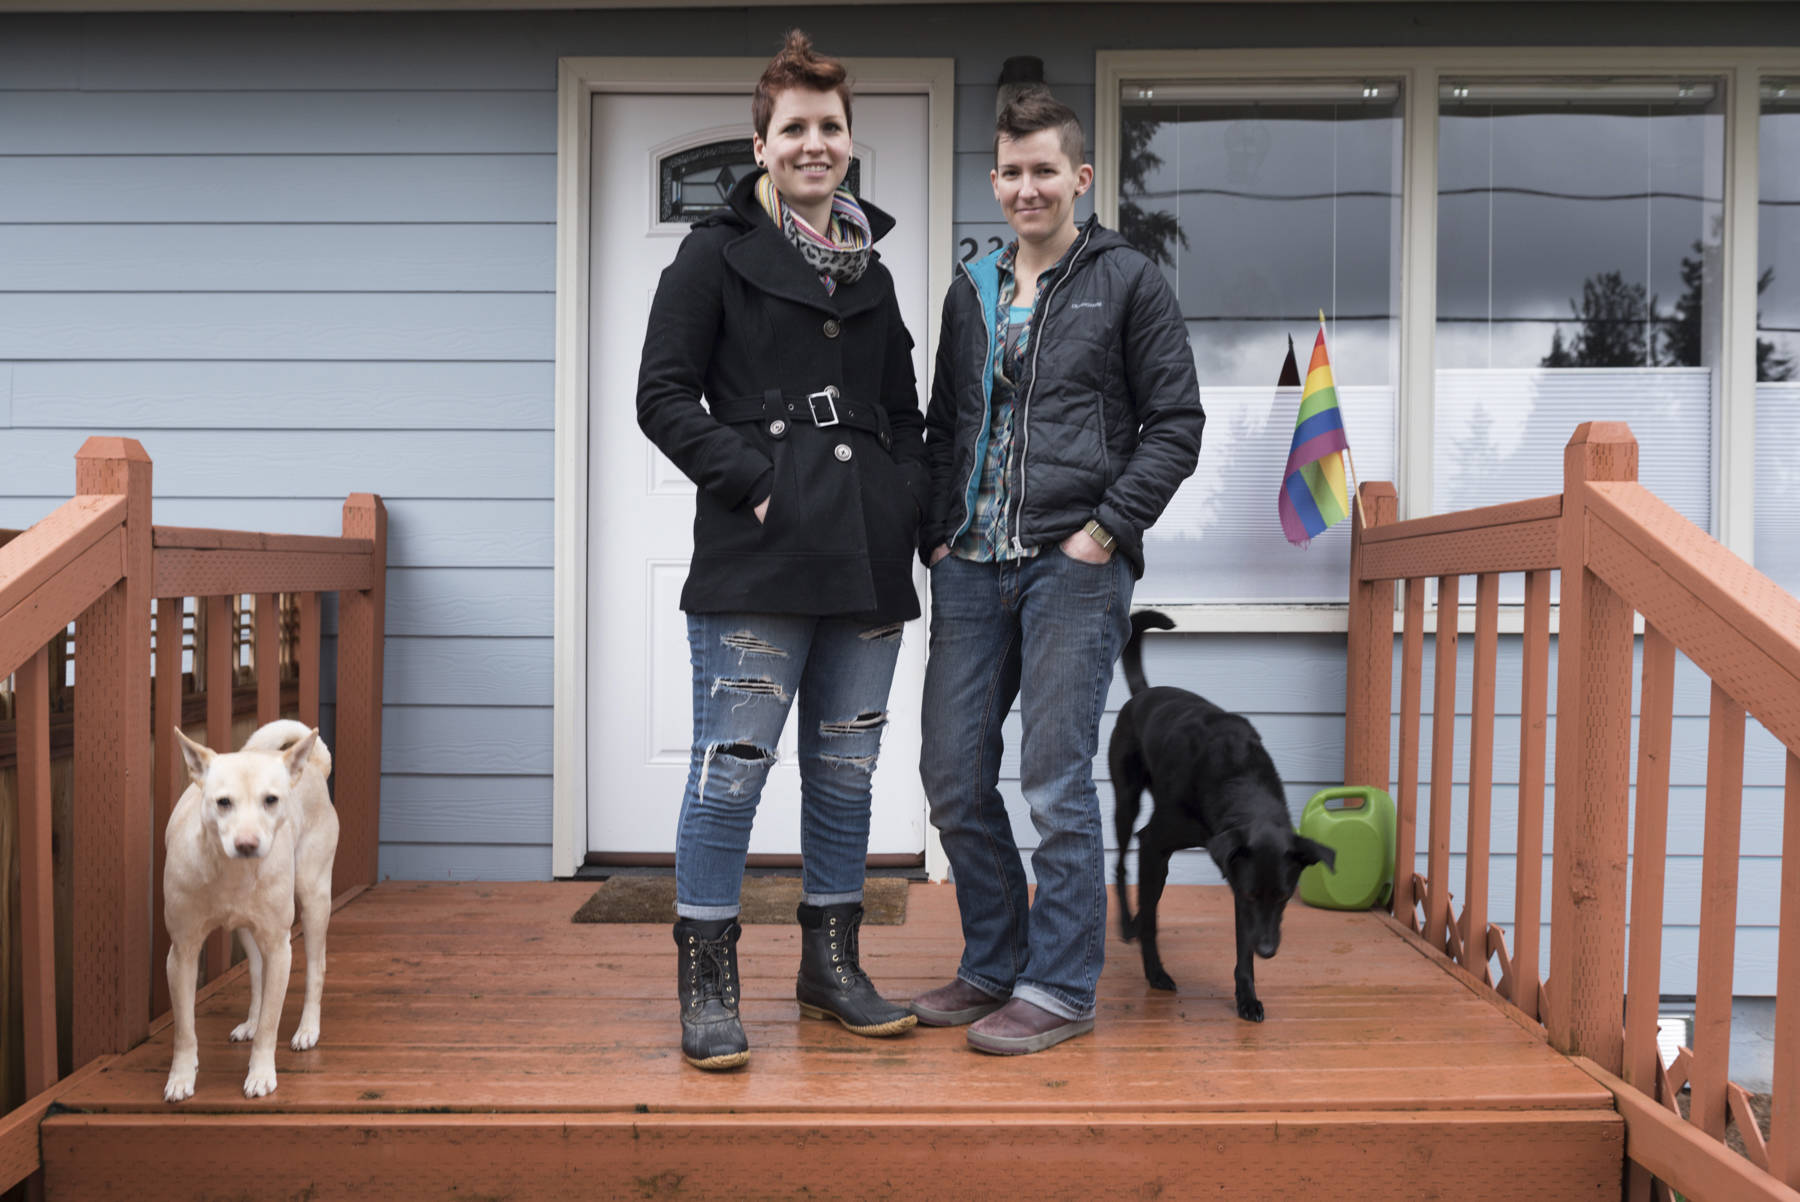 Holly and Amy Seiberlich moved to Bothell. They love the space, but have mixed feelings about the suburban life. Photo by Ted Zee.